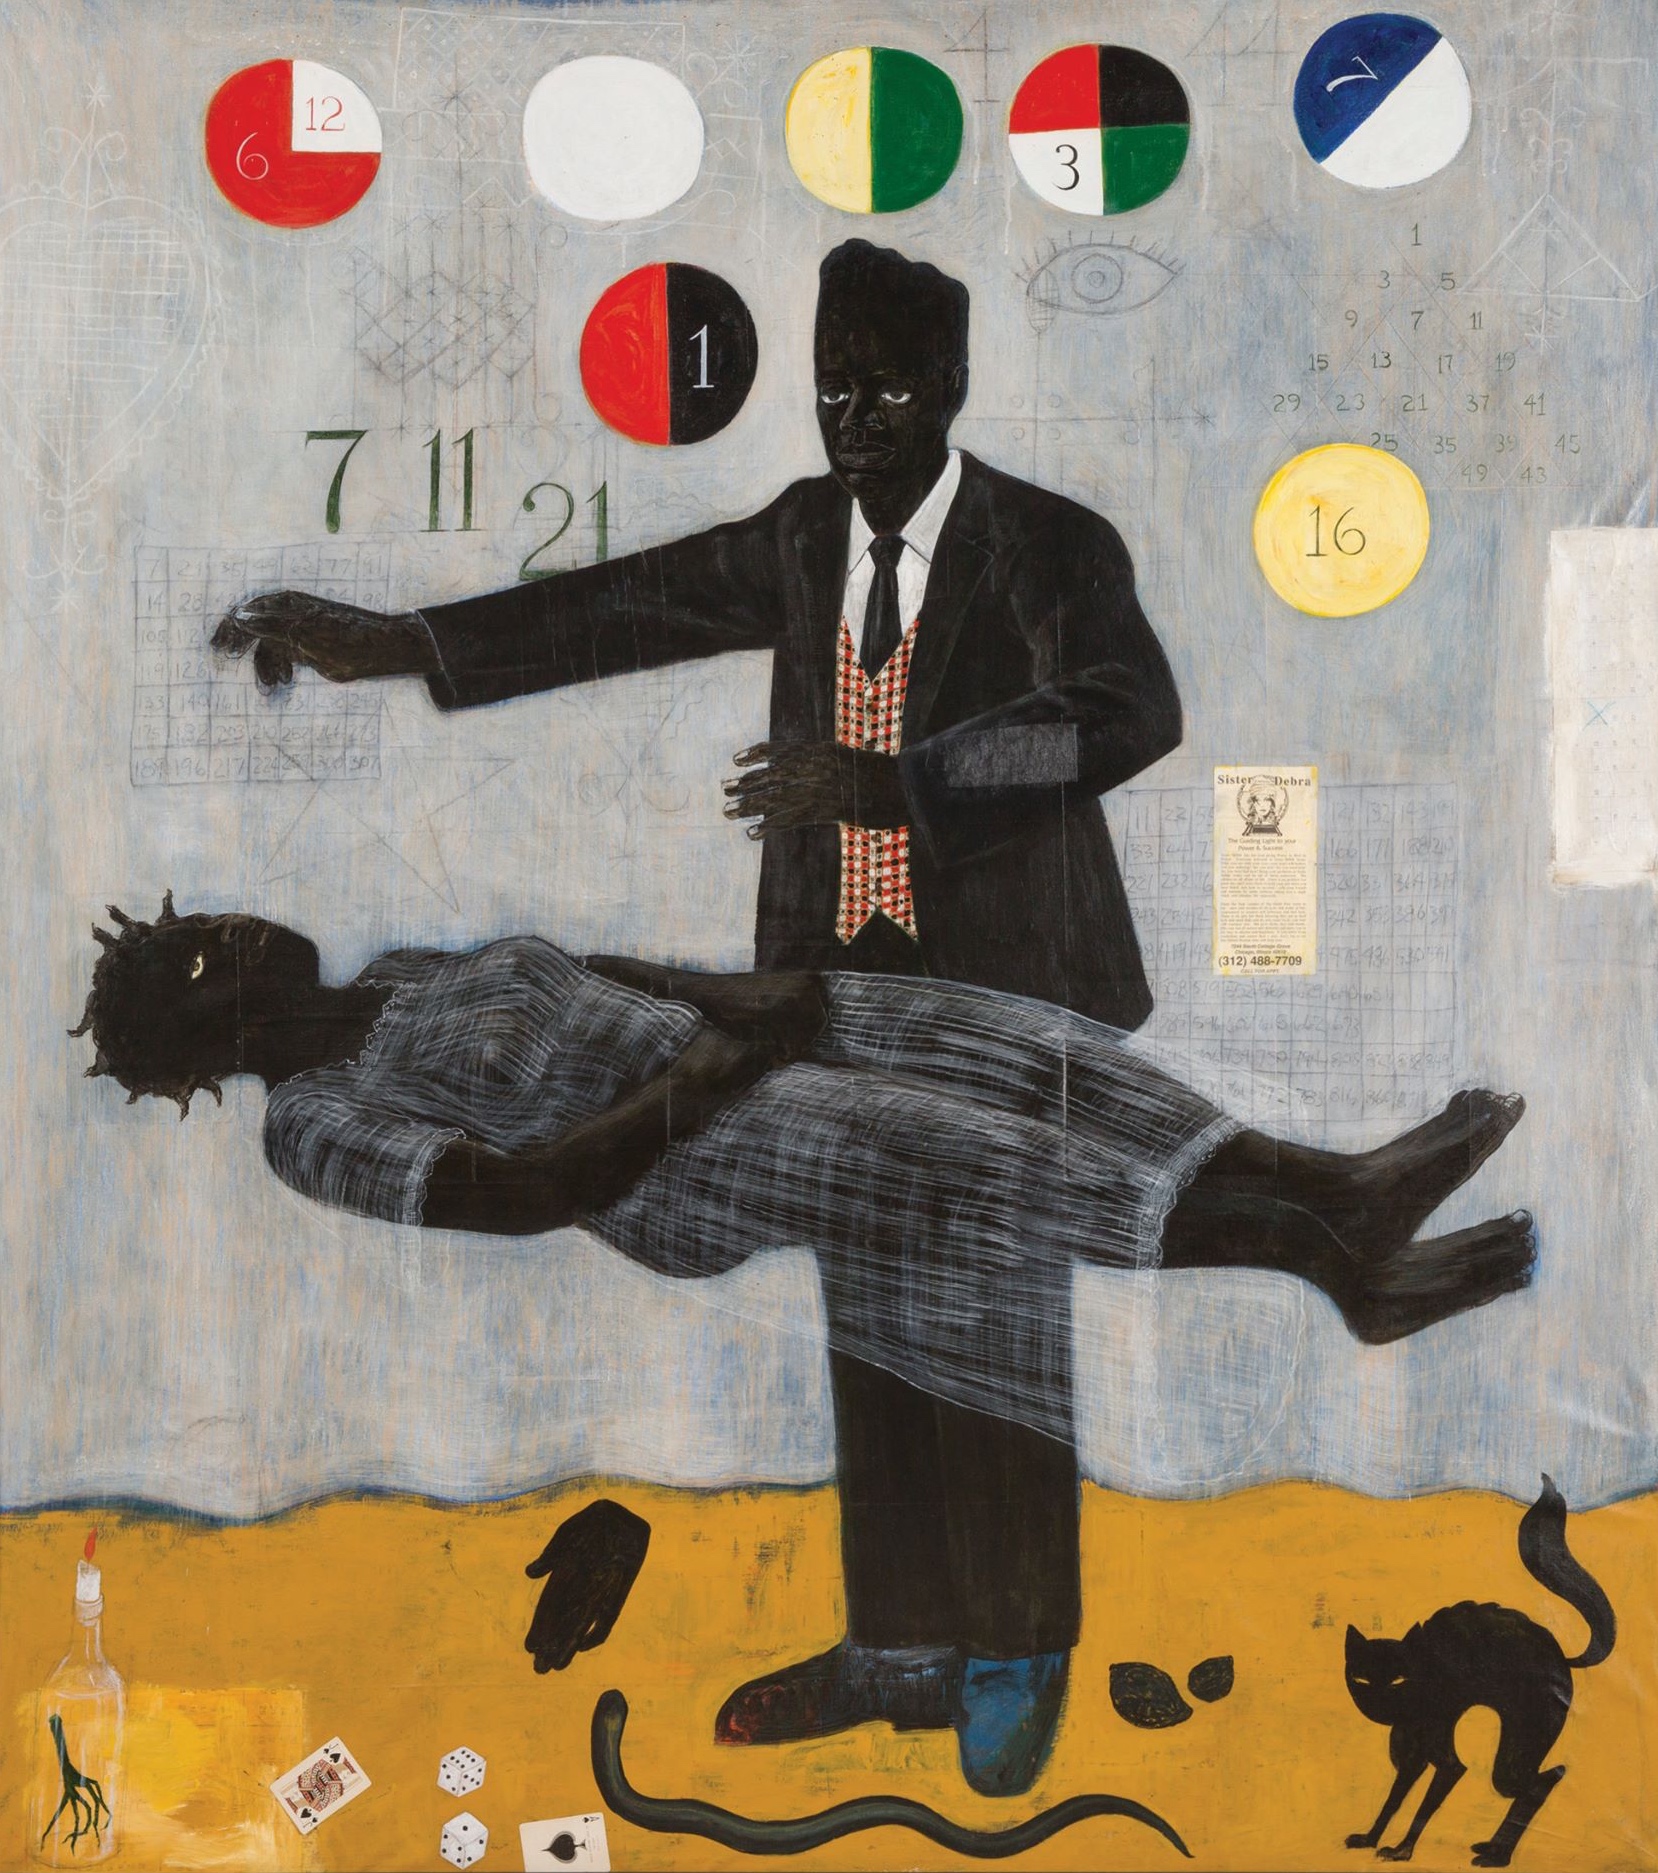 Kerry James Marshall - When Frustration Threatens Desire (1990)